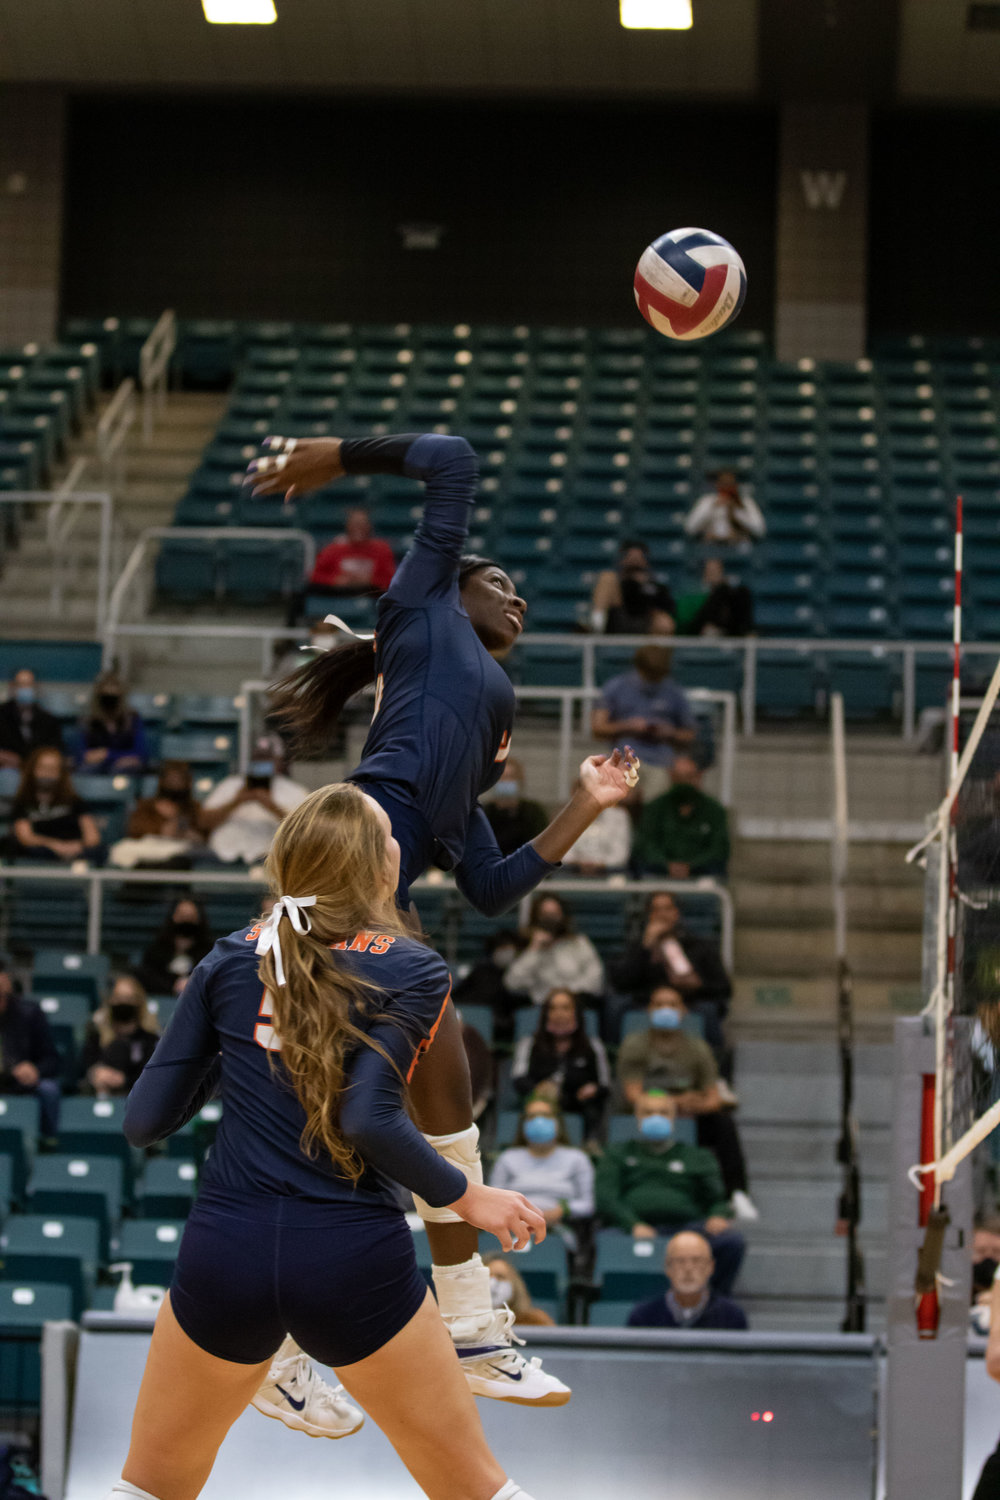 Seven Lakes senior Mayo Olibale swings on the attack during the Spartans' 3-2 win over San Antonio Reagan in their Class 6A state semifinal on Dec. 7 at the Merrell Center.